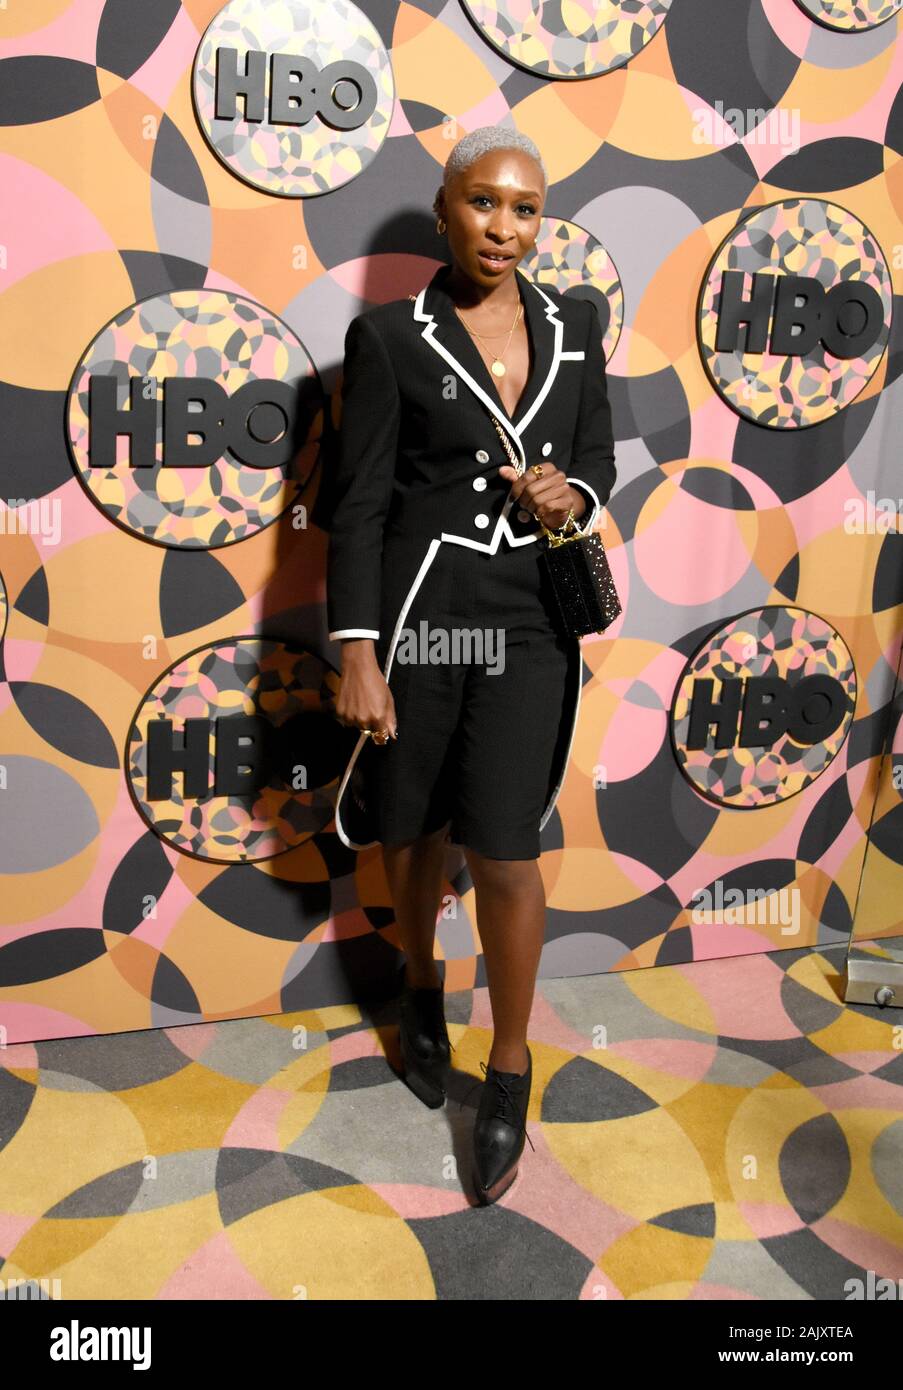 Beverly Hills, California, USA 5th January 2020 Actress Cynthia Erivo attends HBO's Official Golden Globes After Party on January 5, 2020 at Circa 55 Restaurant in Beverly Hills, California, USA. Photo by Barry King/Alamy Live News Stock Photo